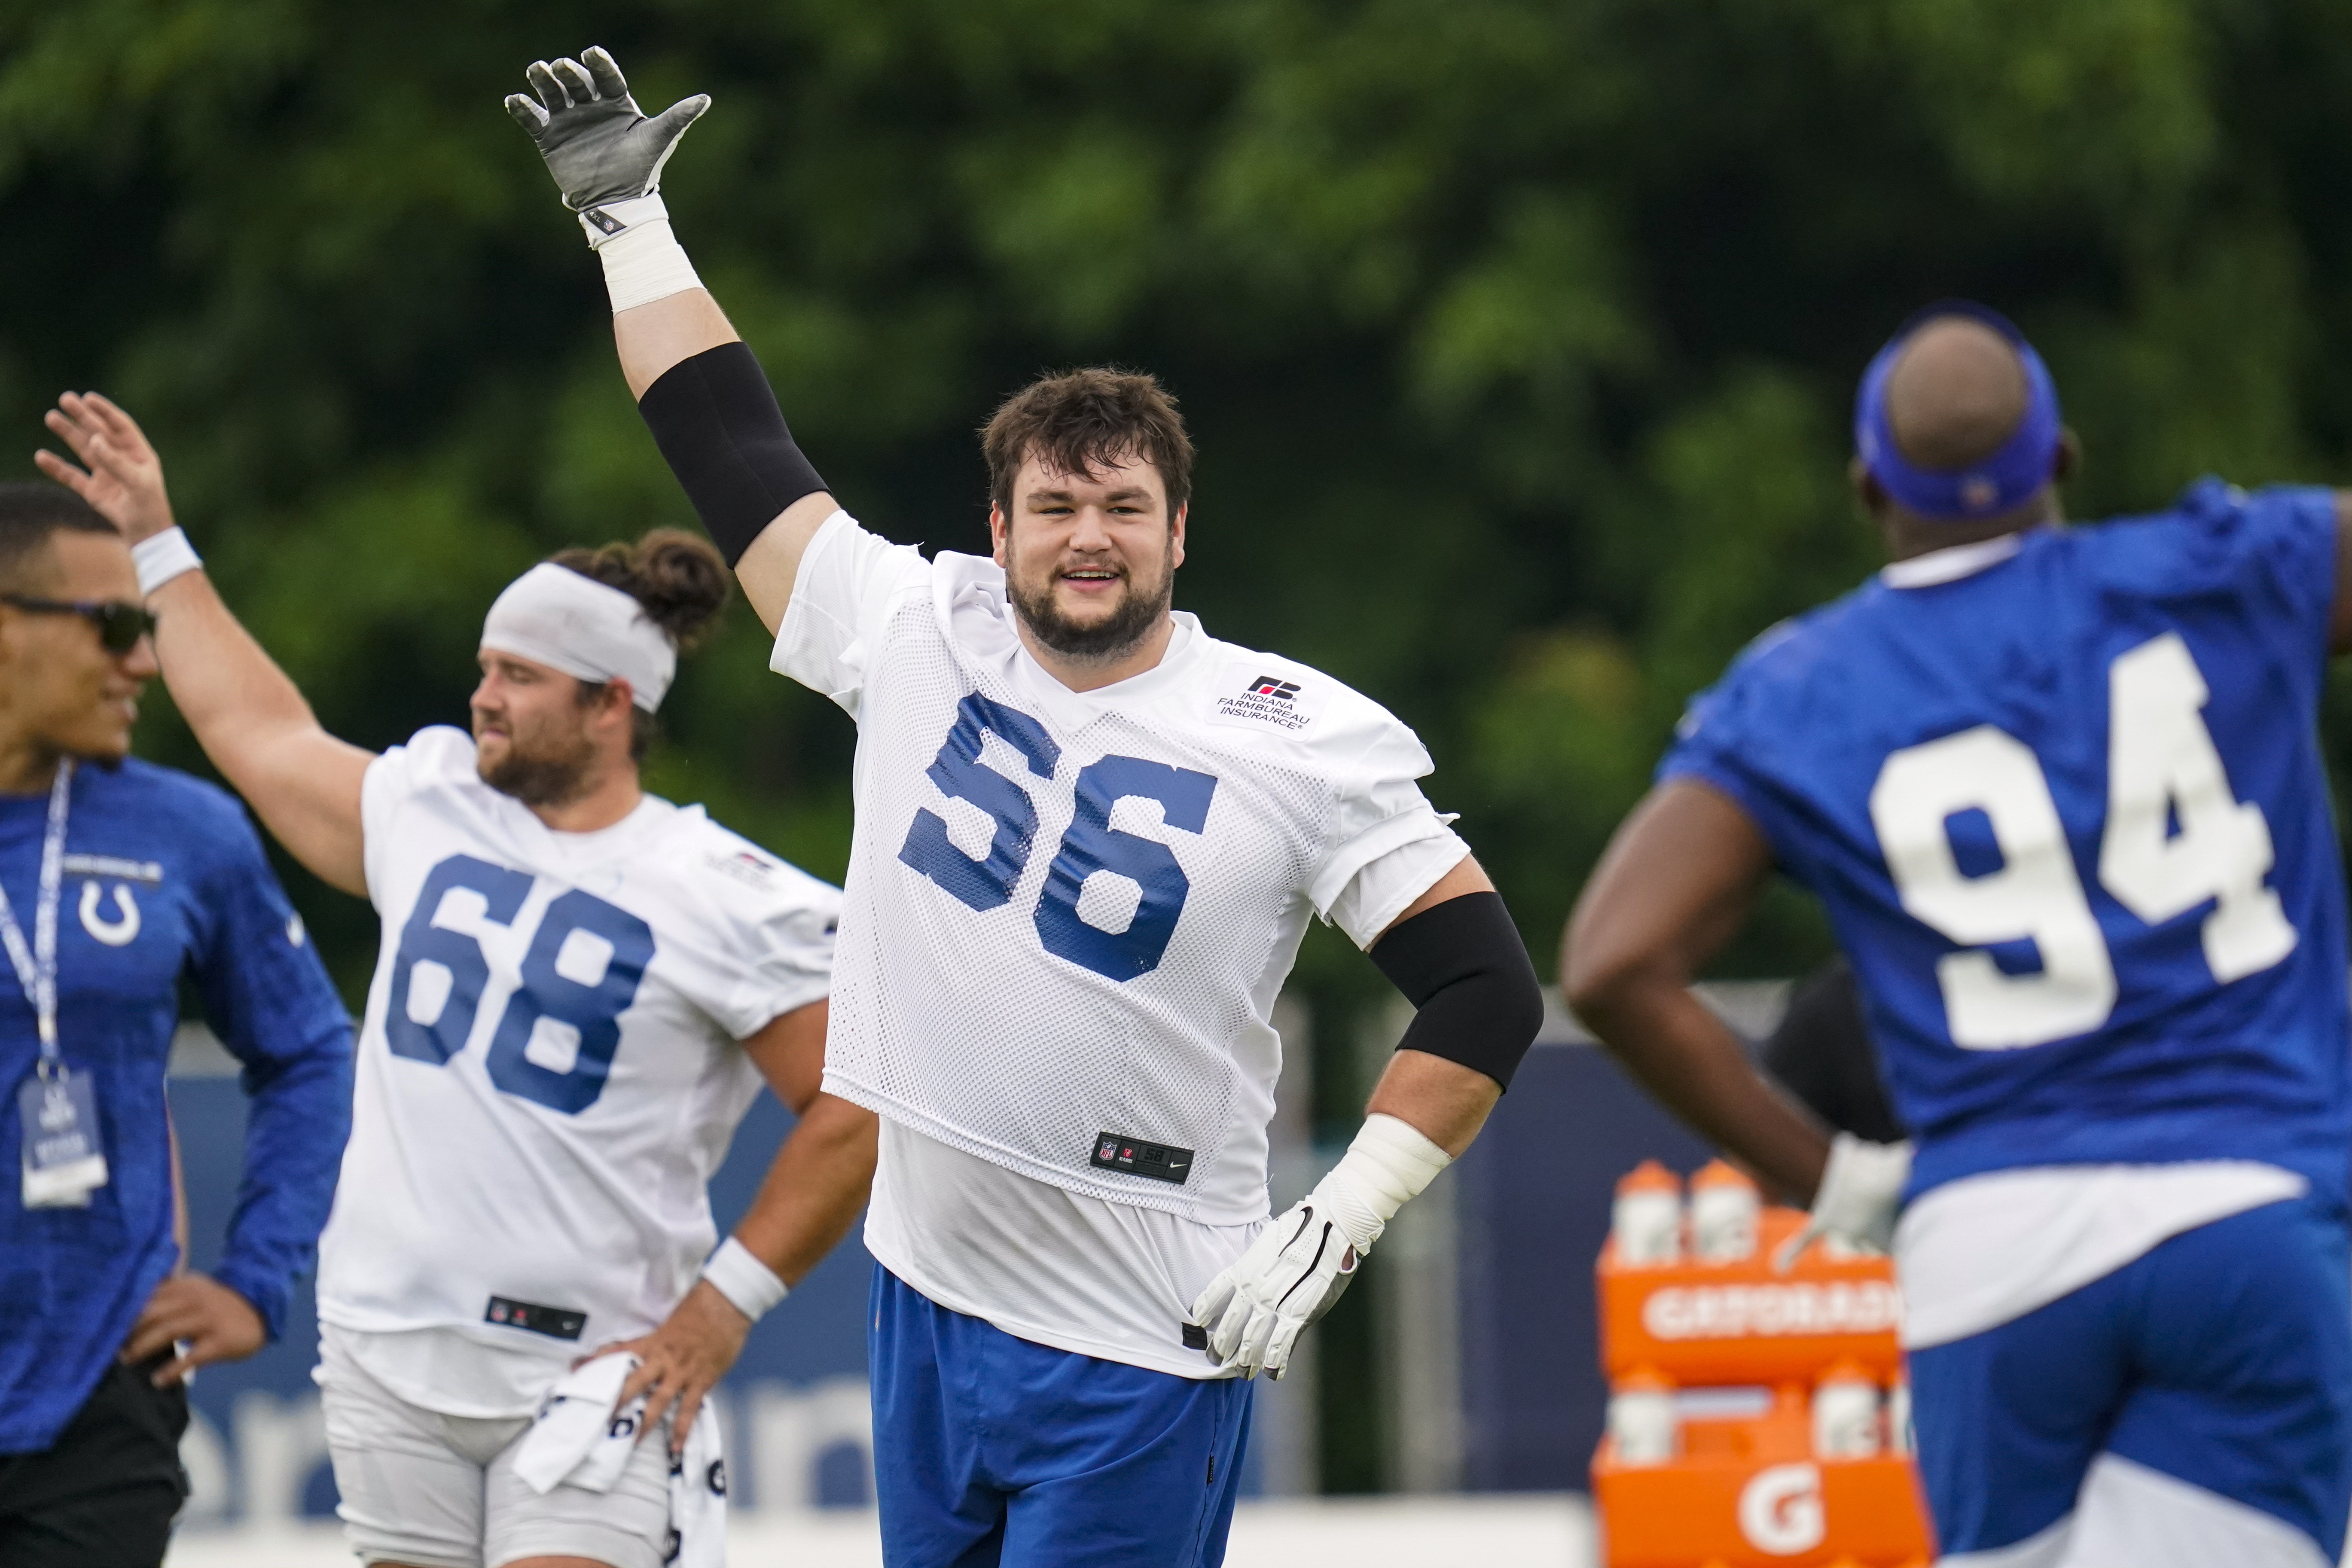 Foot injury to keep Colts lose All-Pro guard Quenton Nelson out 5-12 weeks